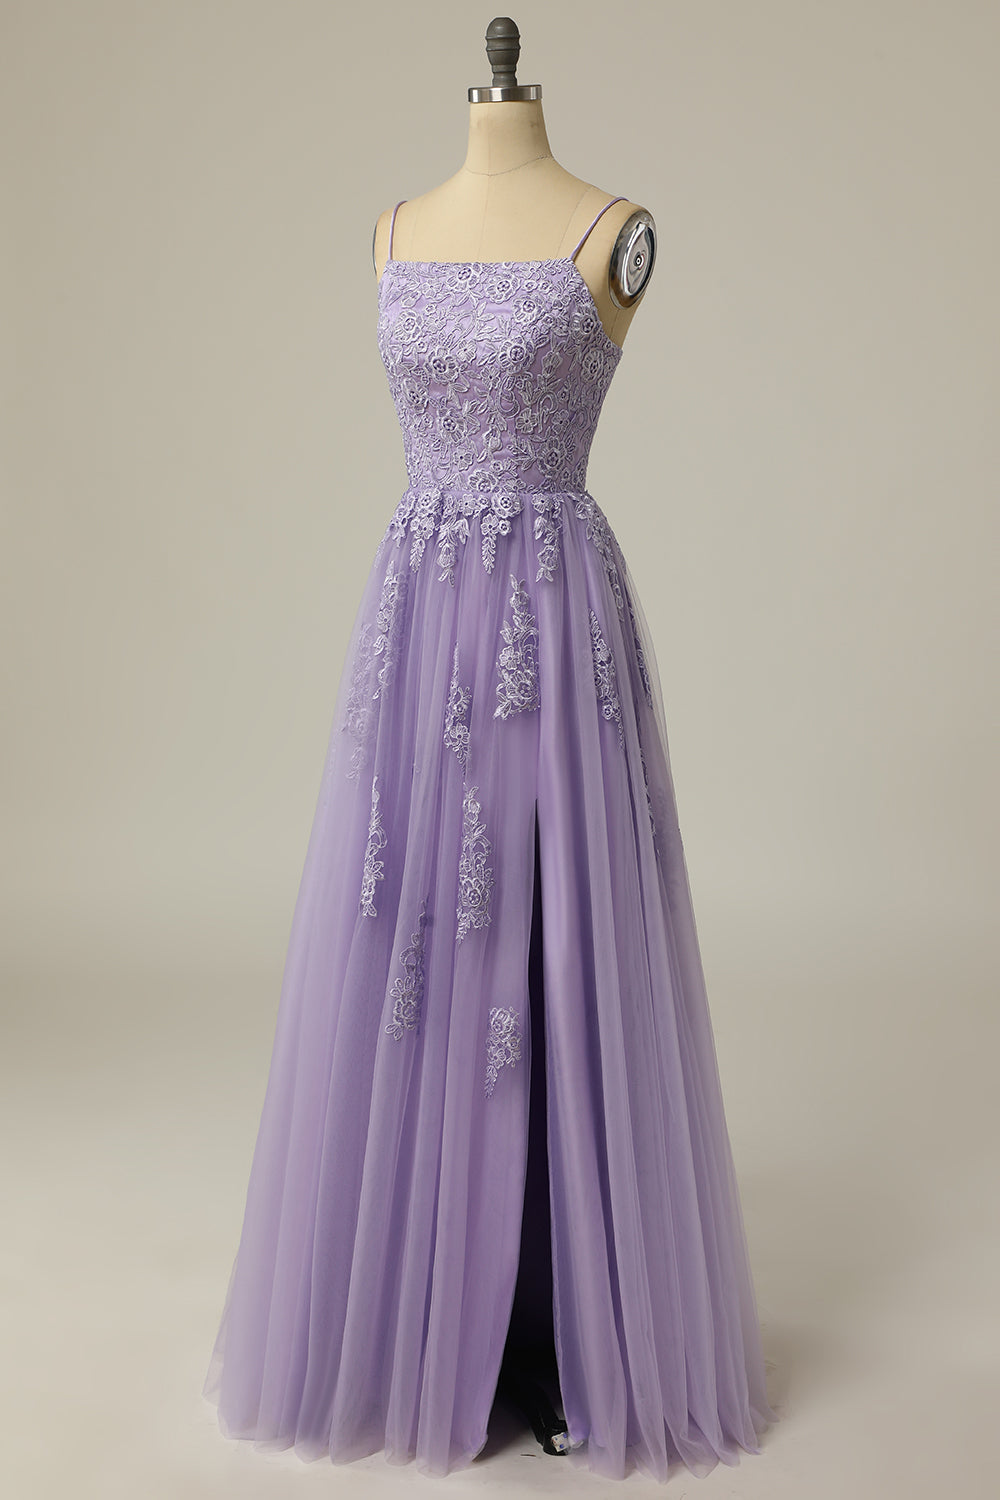 Bridesmaids Dresses Styles, A Line Strapless Light Purple Long Prom Dress with Appliques